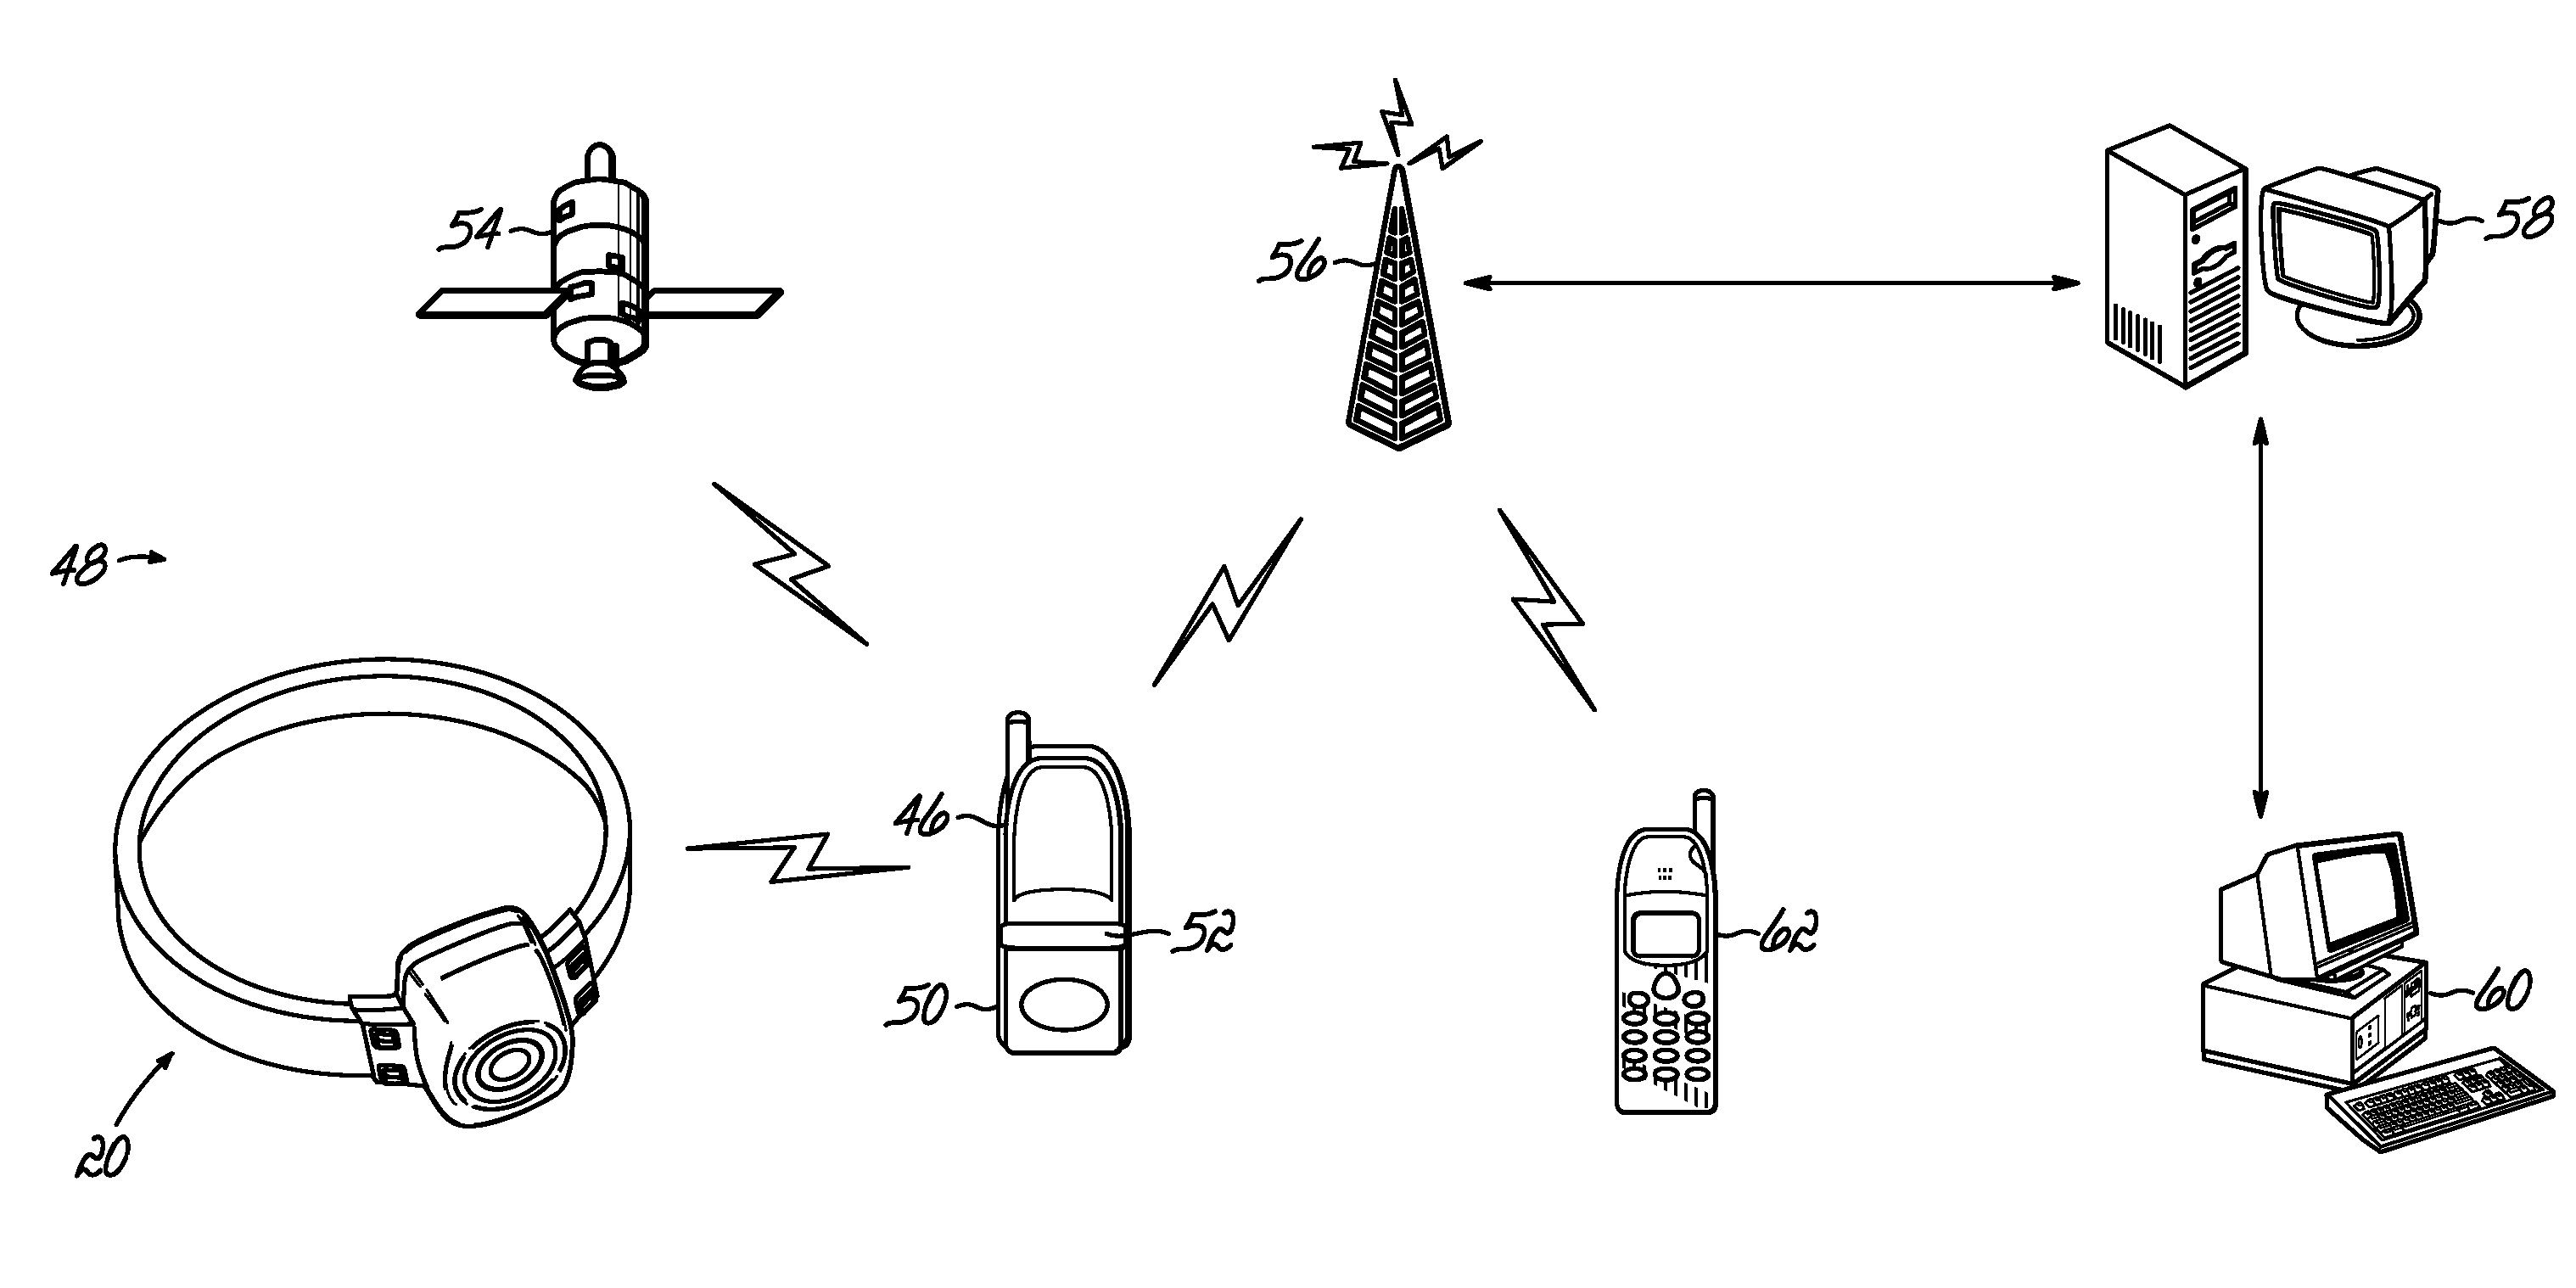 Device and method for tethering a person wirelessly with a cellular telephone